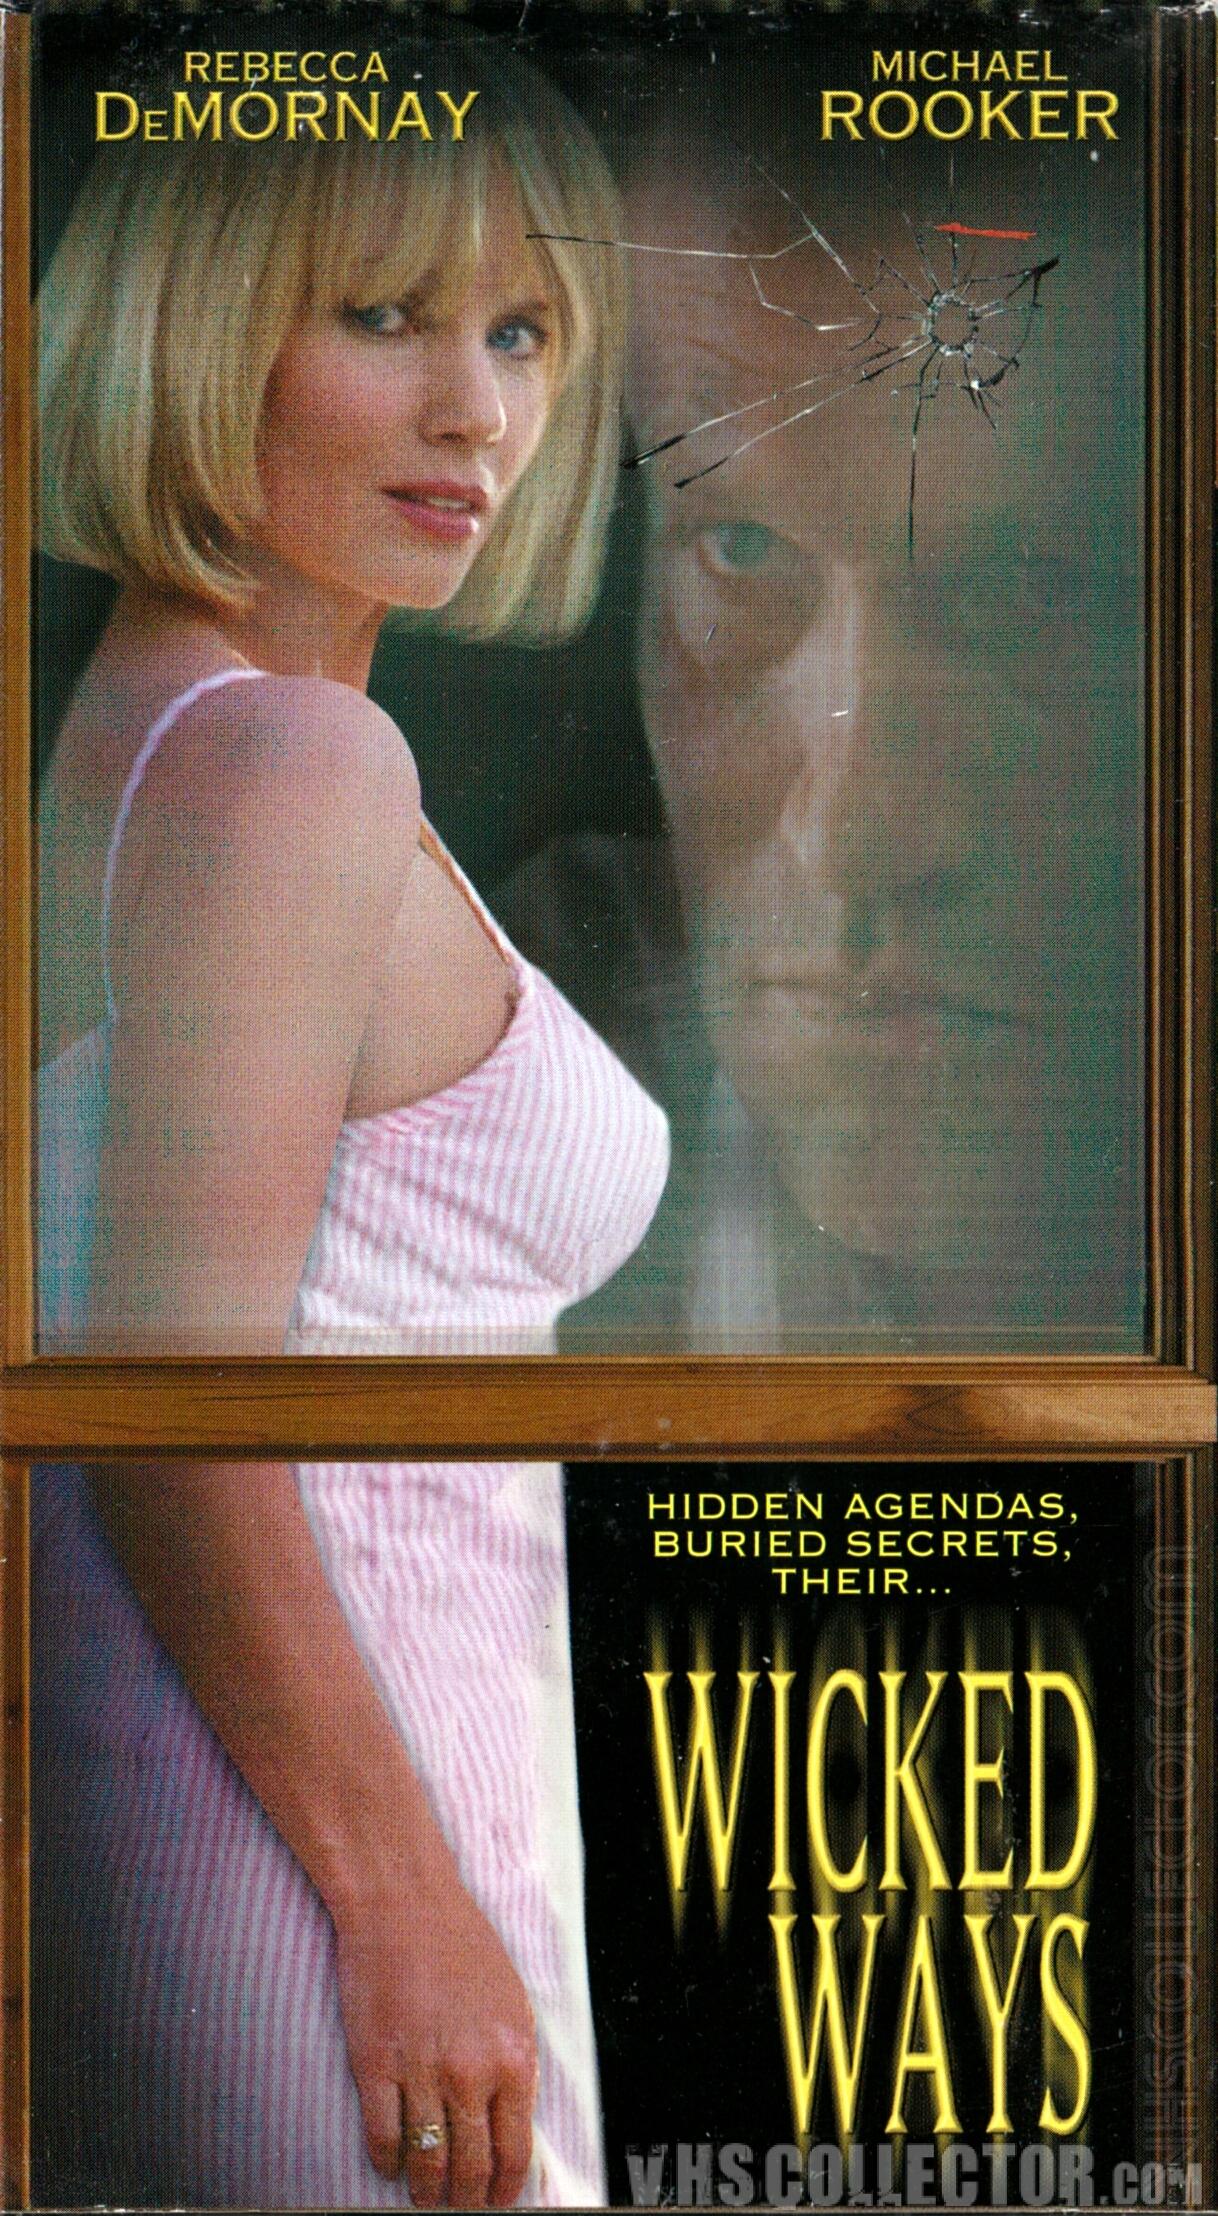 Wicked Ways | VHSCollector.com